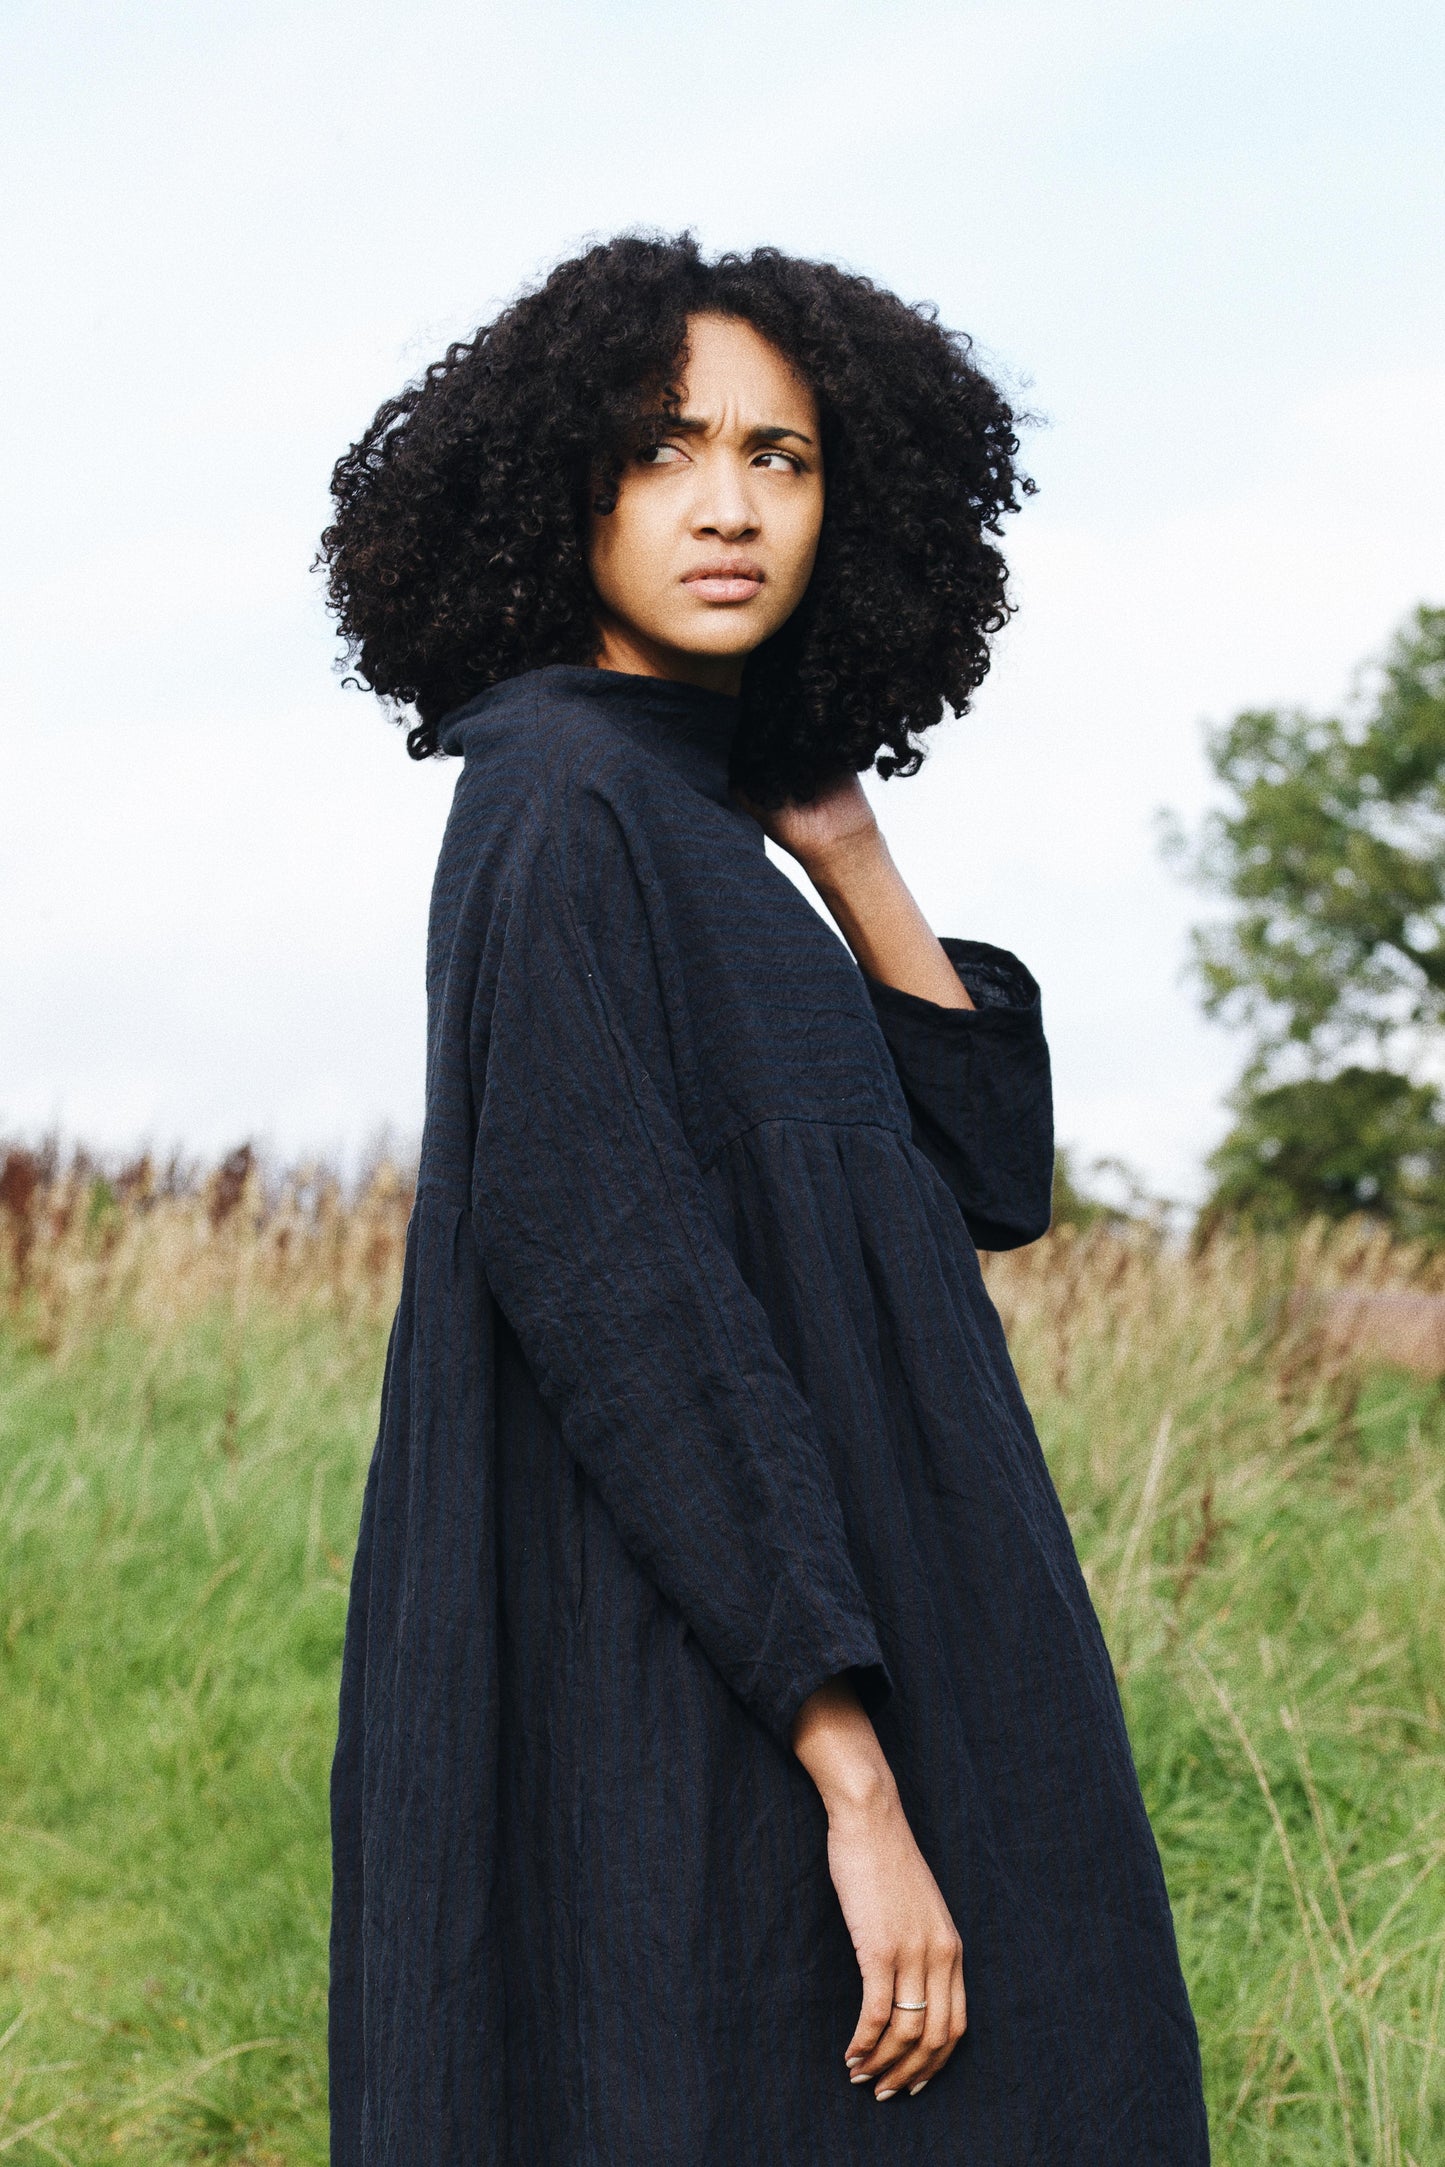 TILLIE DRESS | An effortless throw on that will feel right at home in a considered, every-day wardrobe. Tillie features a high neckline that sits elegantly across the neck- she can easily be dressed up or down and layered up for the colder months. Pair wi